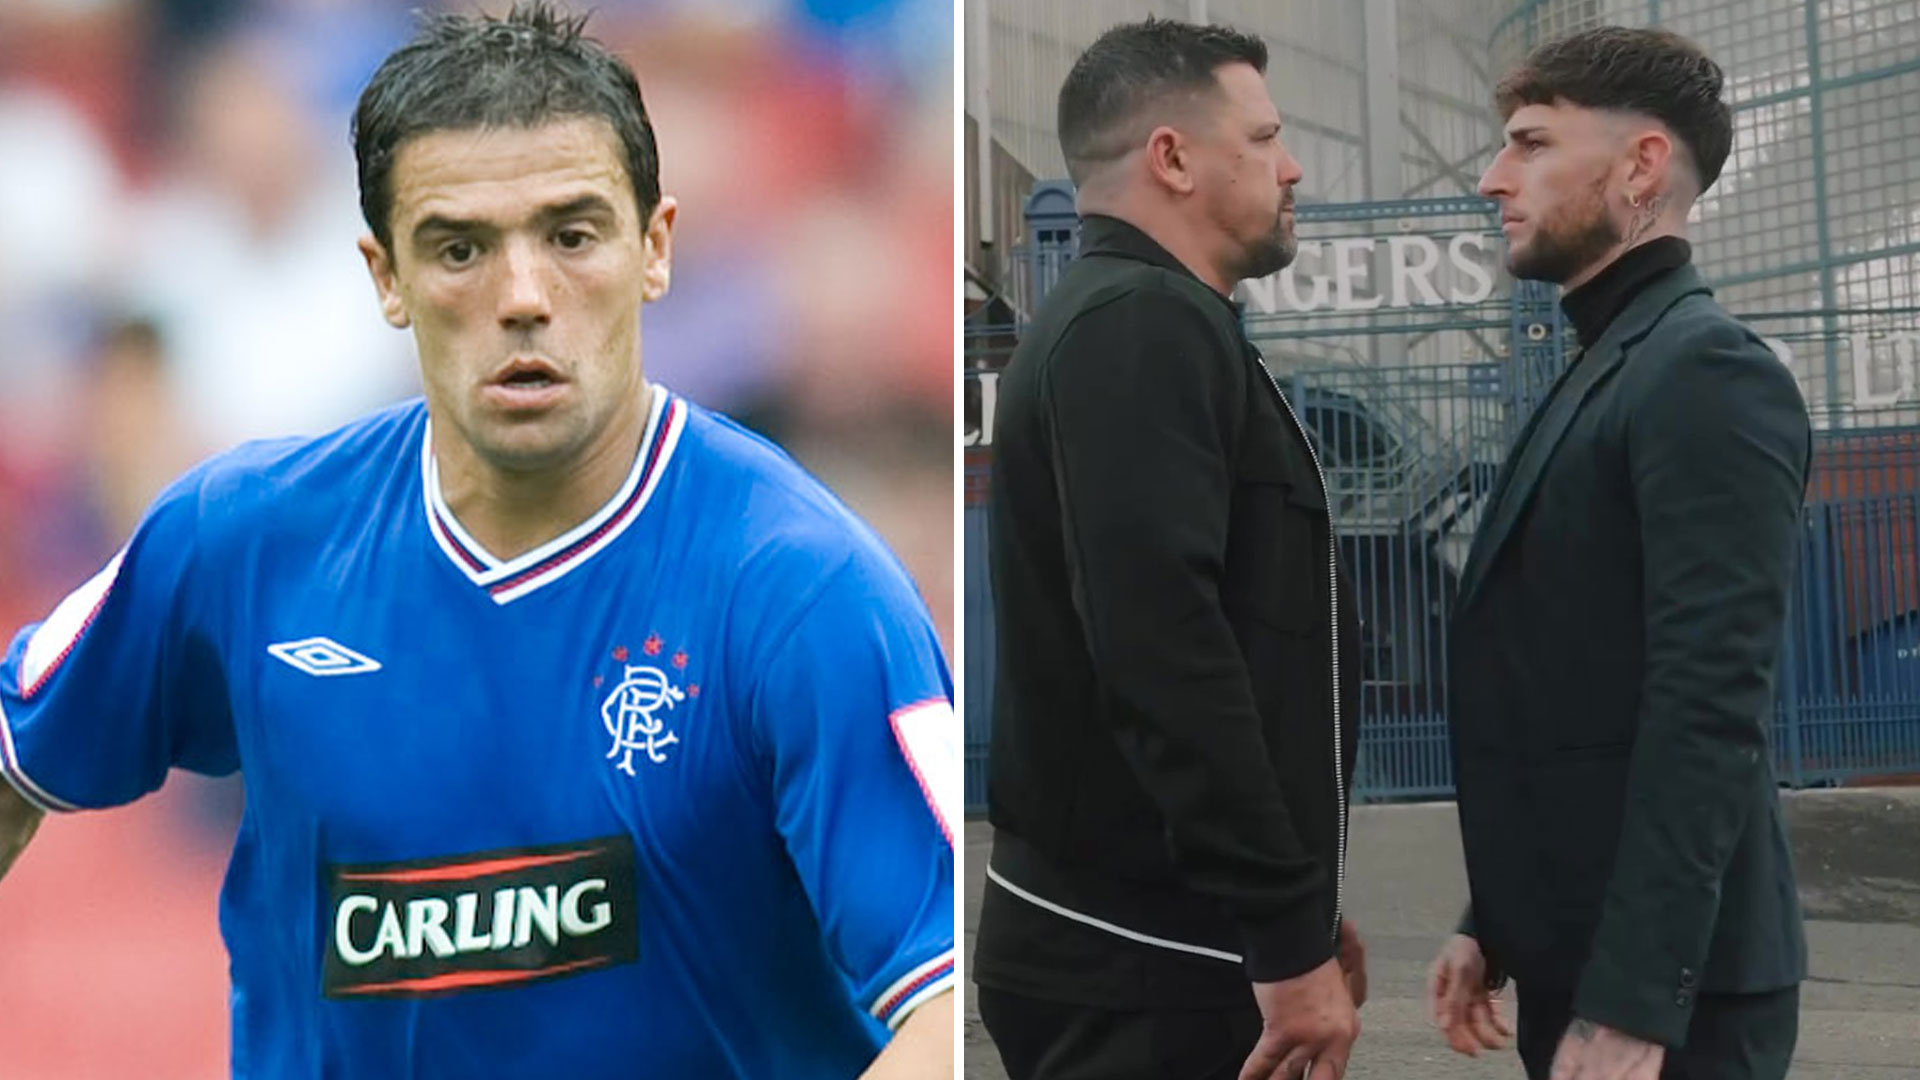 Rangers legend, 45, goes from major health scare to shock career change as he’s set to box ‘Scotland’s Jake Paul’ [Video]